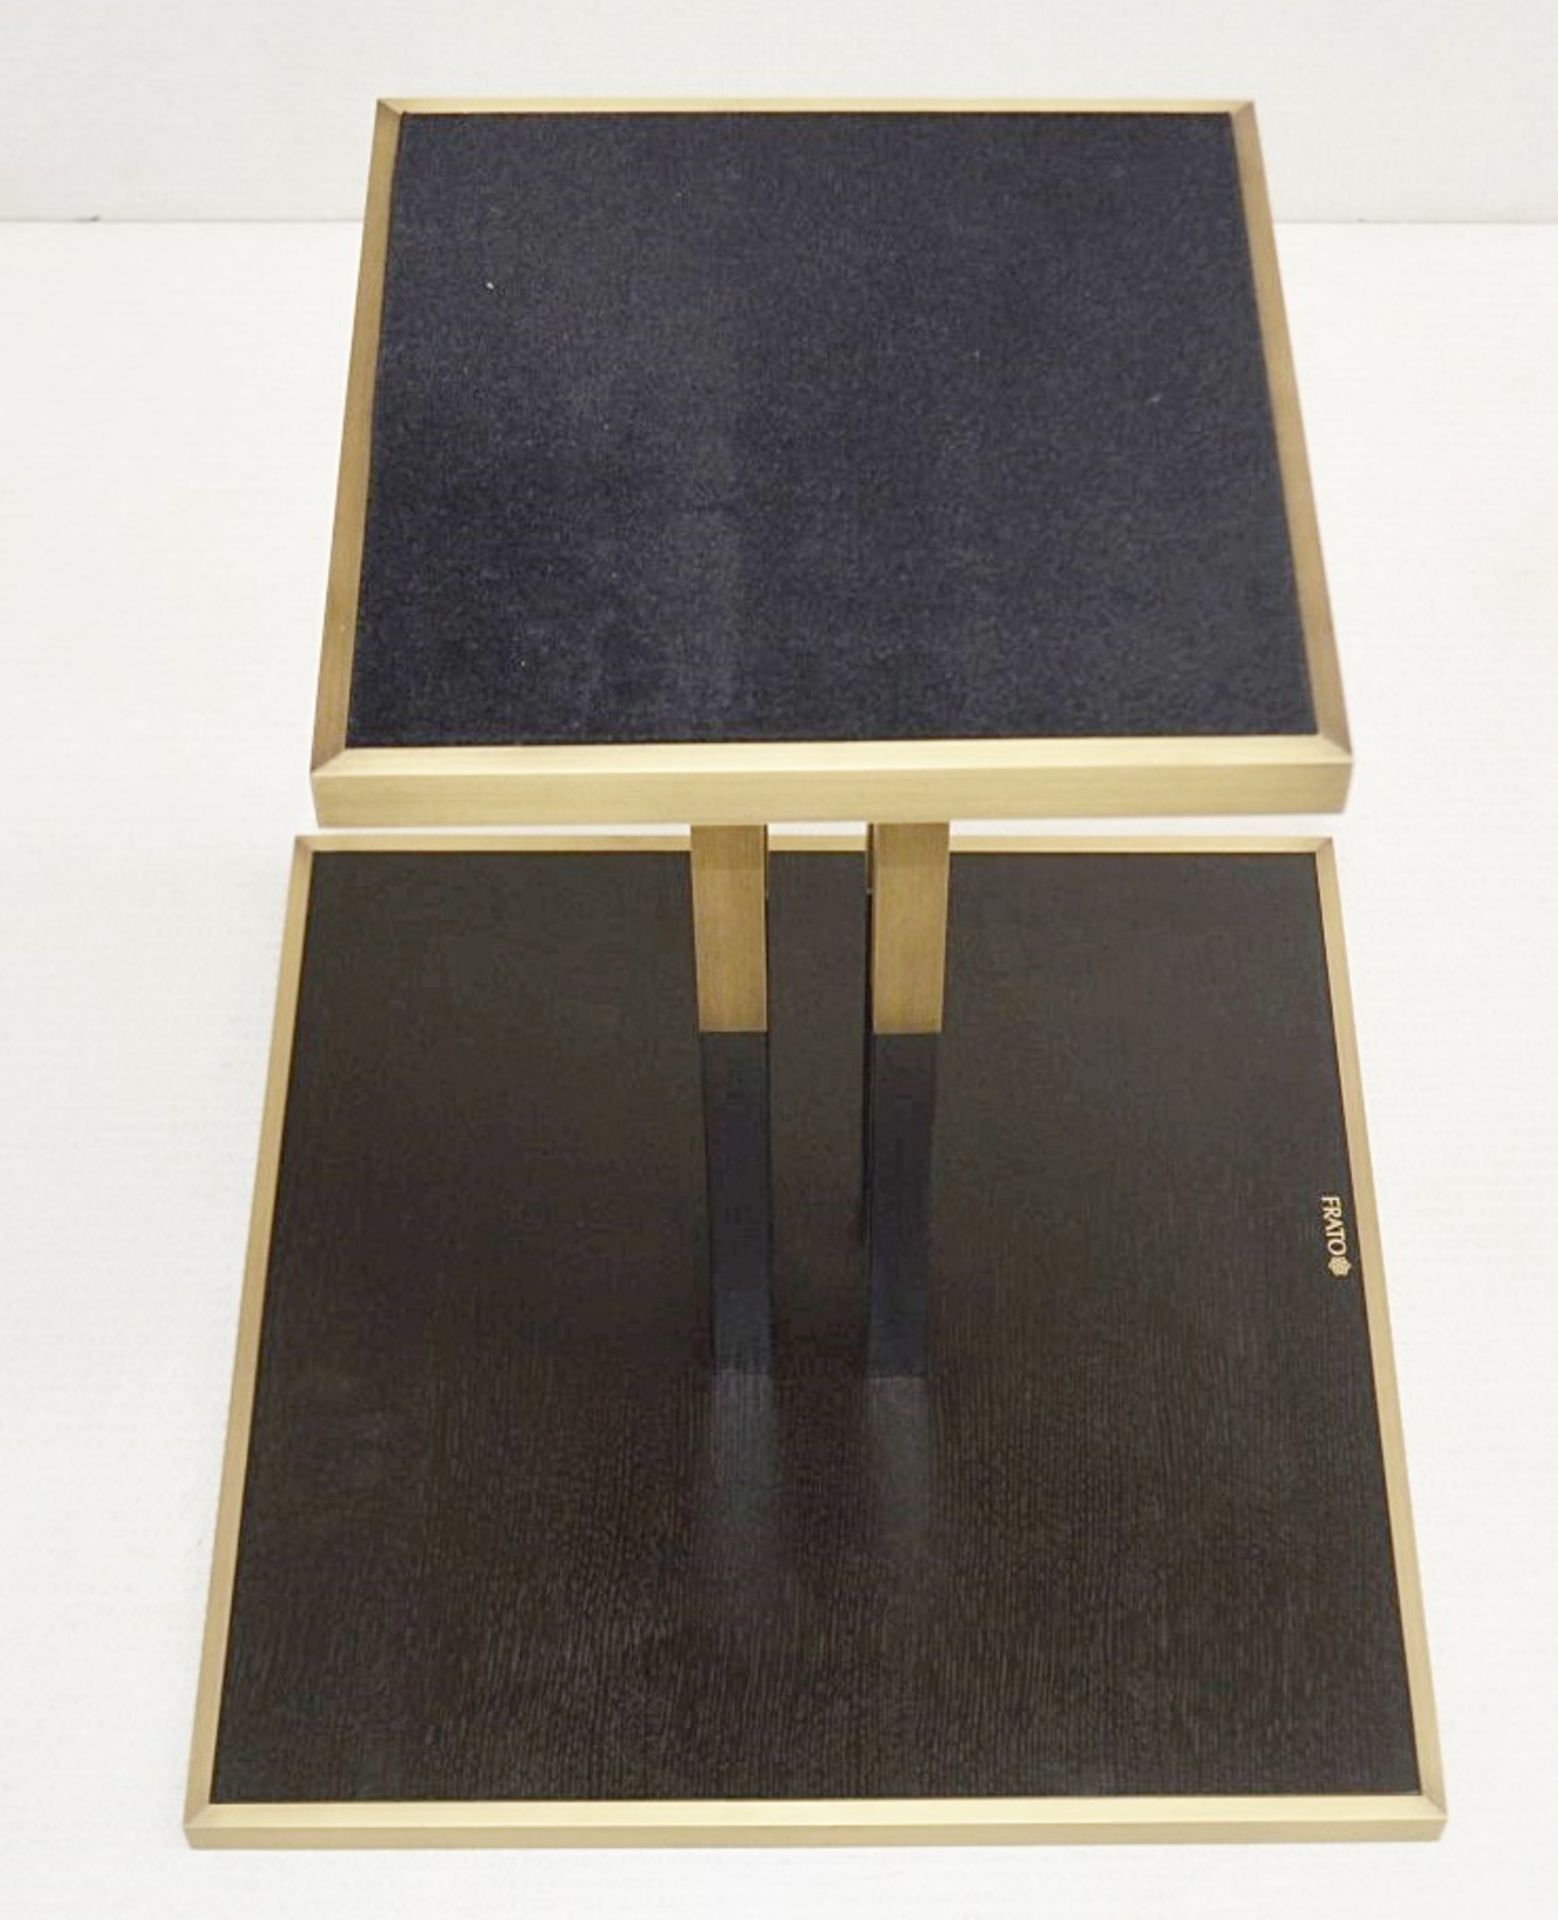 1 x FRATO 'Perth' Luxury Side Table In Wenge With Brushed Brass Details - RRP £1,626 - Image 6 of 7